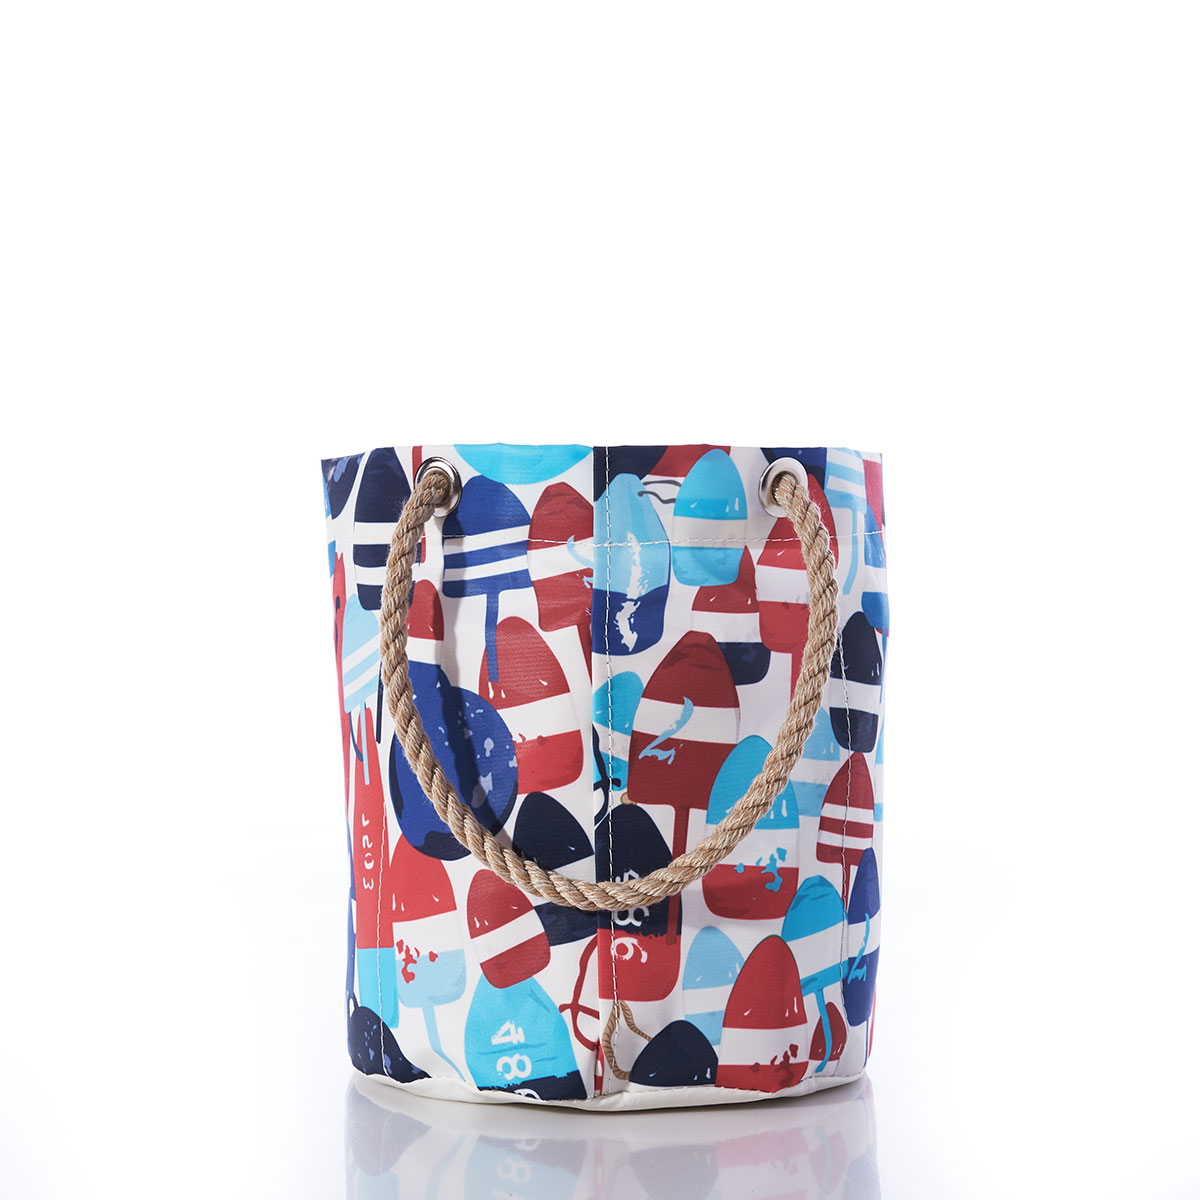 back view: a recycled sail cloth beverage bucket bag with hemp rope handles is emblazoned with a variety of printed buoys in reds and blues in different shapes and sizes